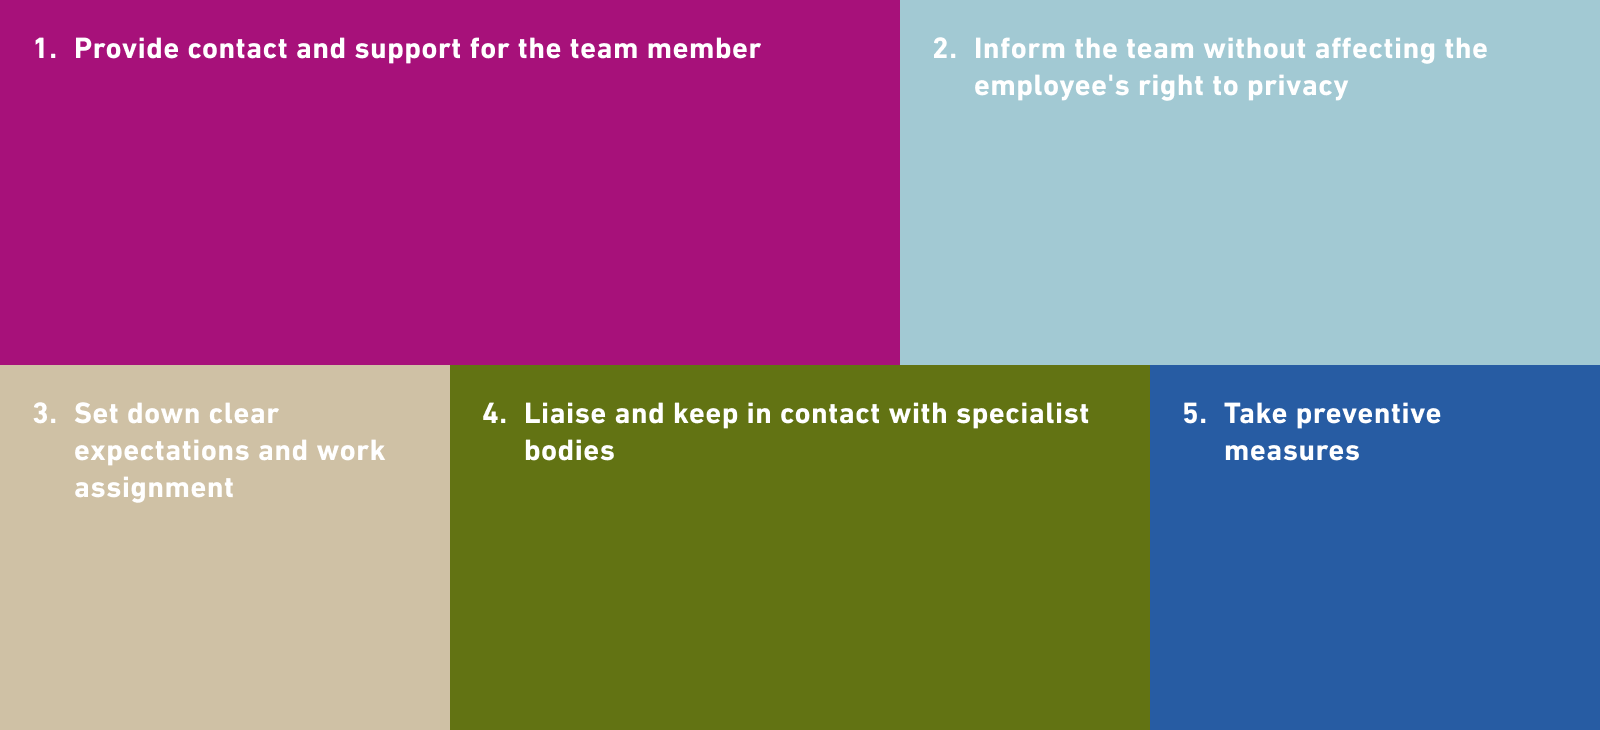 1. Provide contact and support for the team member 2. Inform the team without affecting the employee's right to privacy 3. Set down clear expectations and work assignment 4. Liaise and keep in contact with specialist entities 5. Take preventive measures